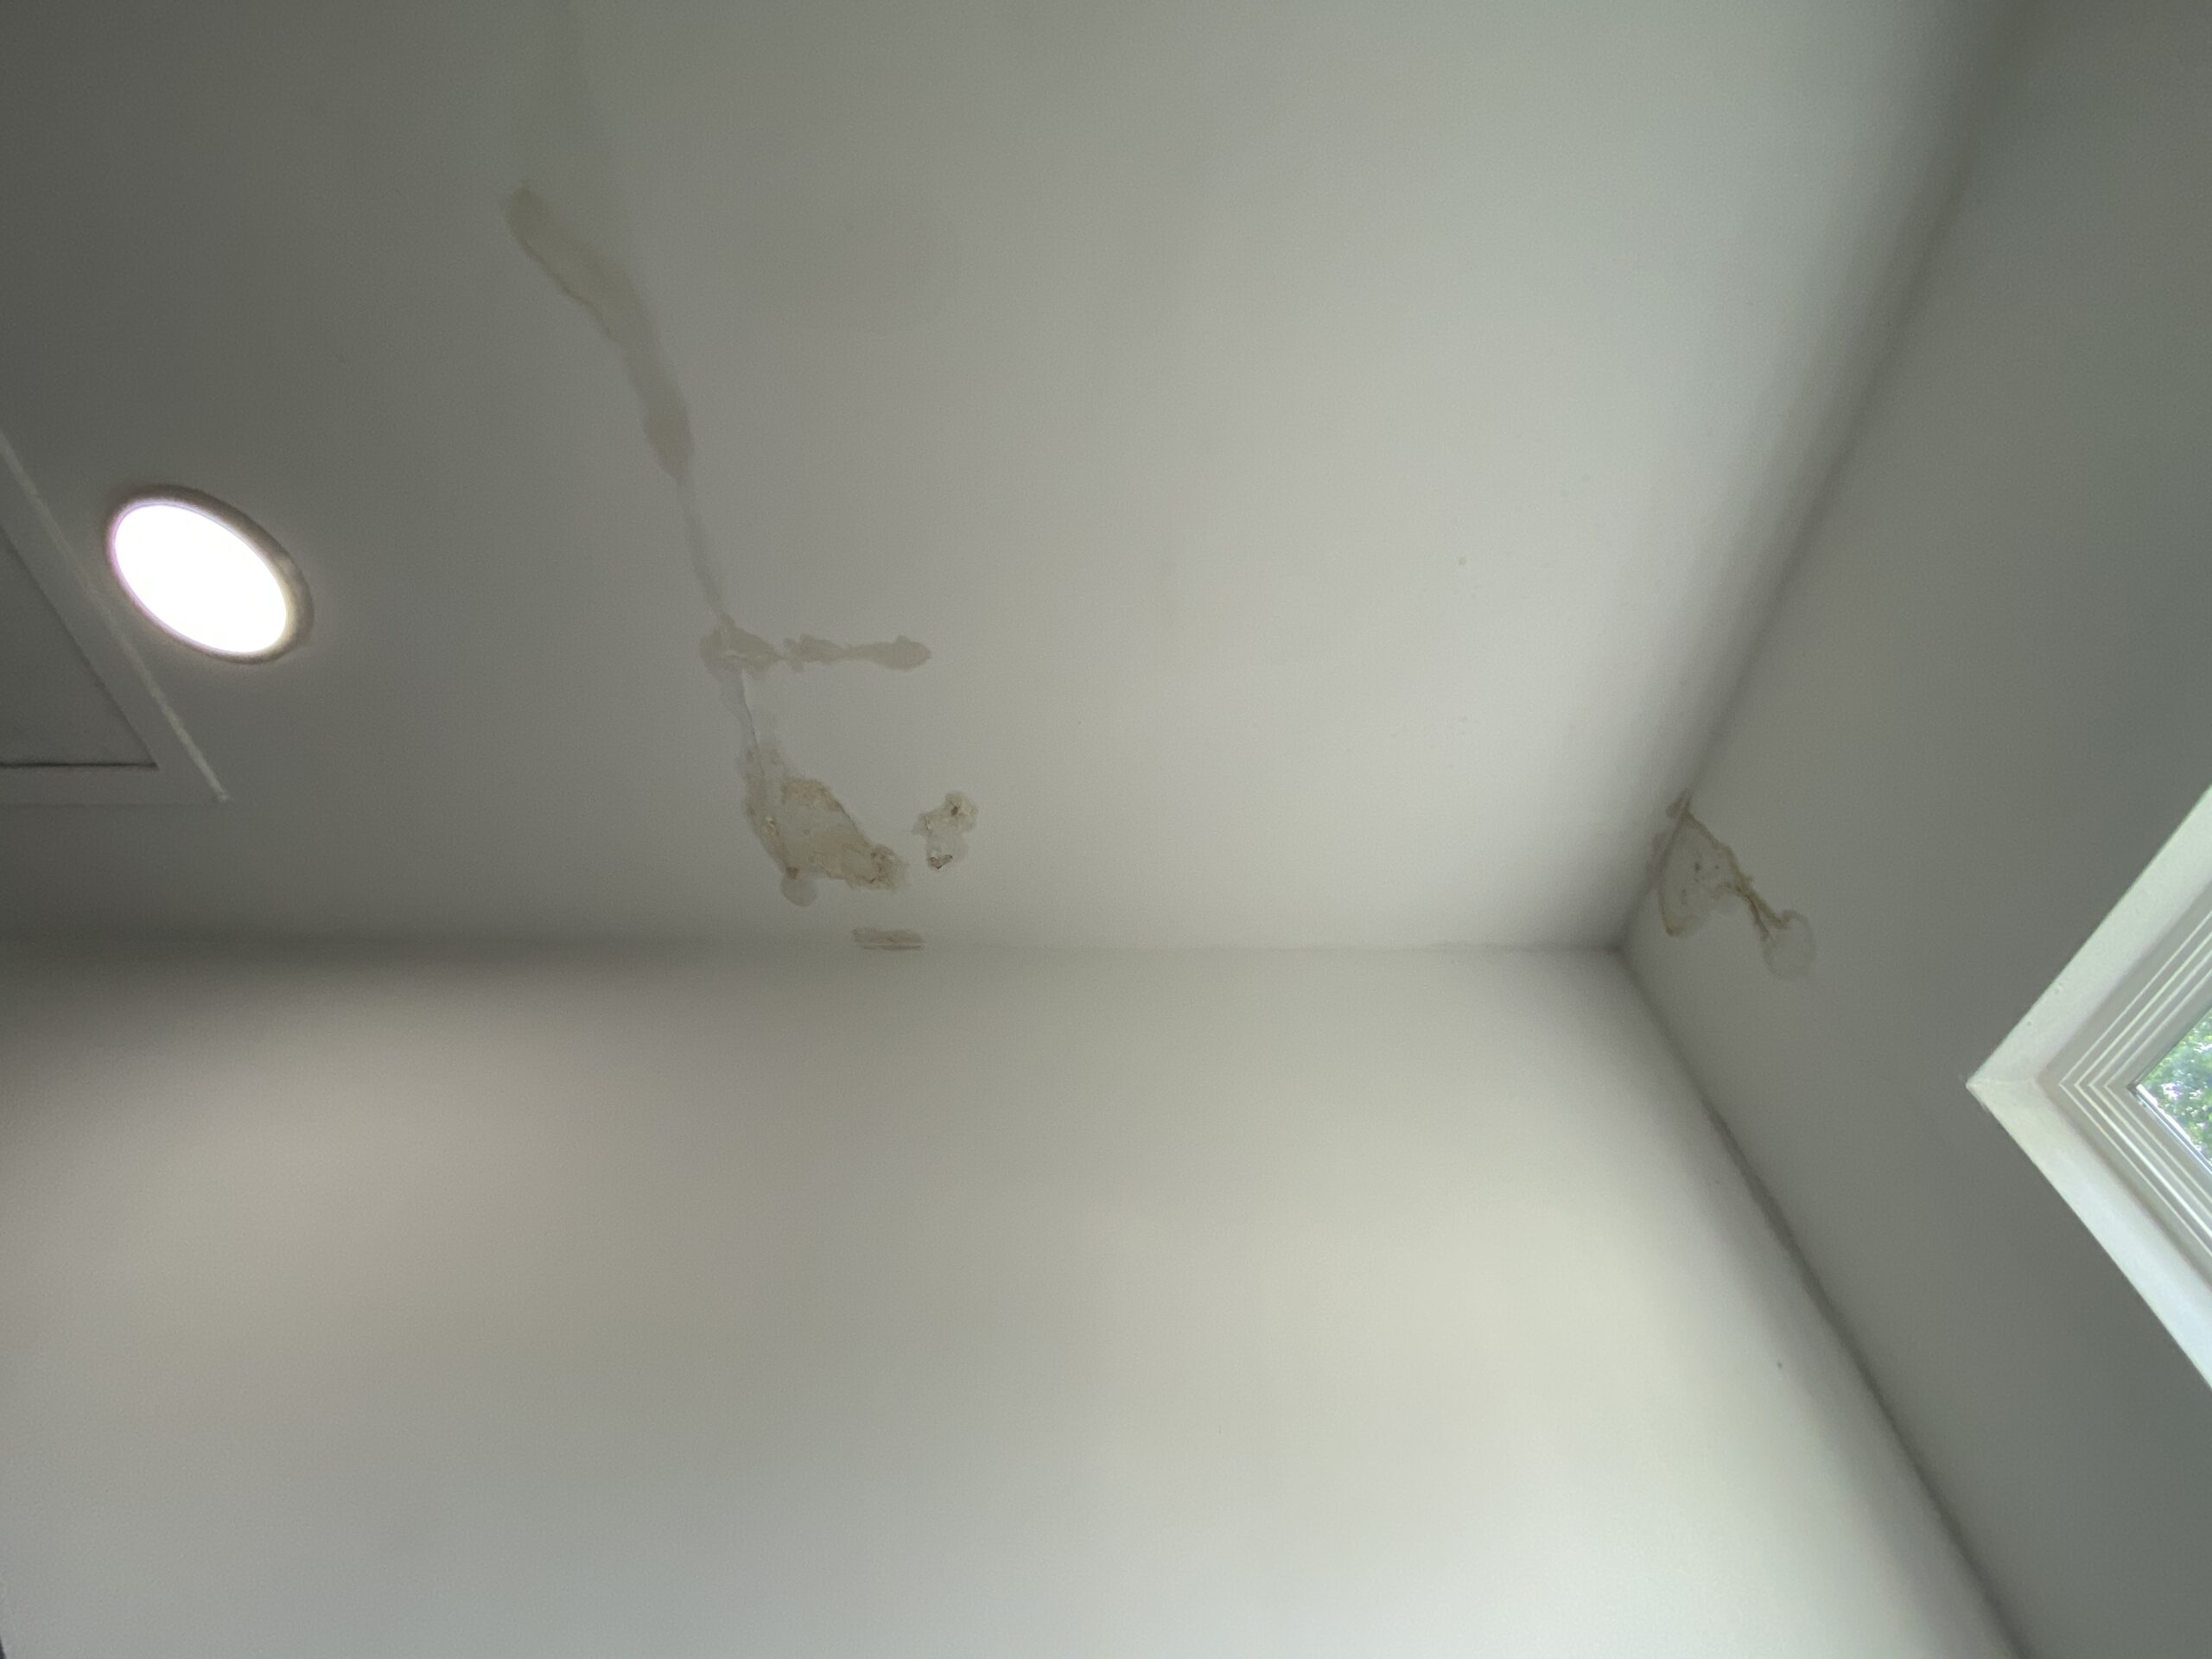 This is a picture of a stain on a ceiling from a roof leak